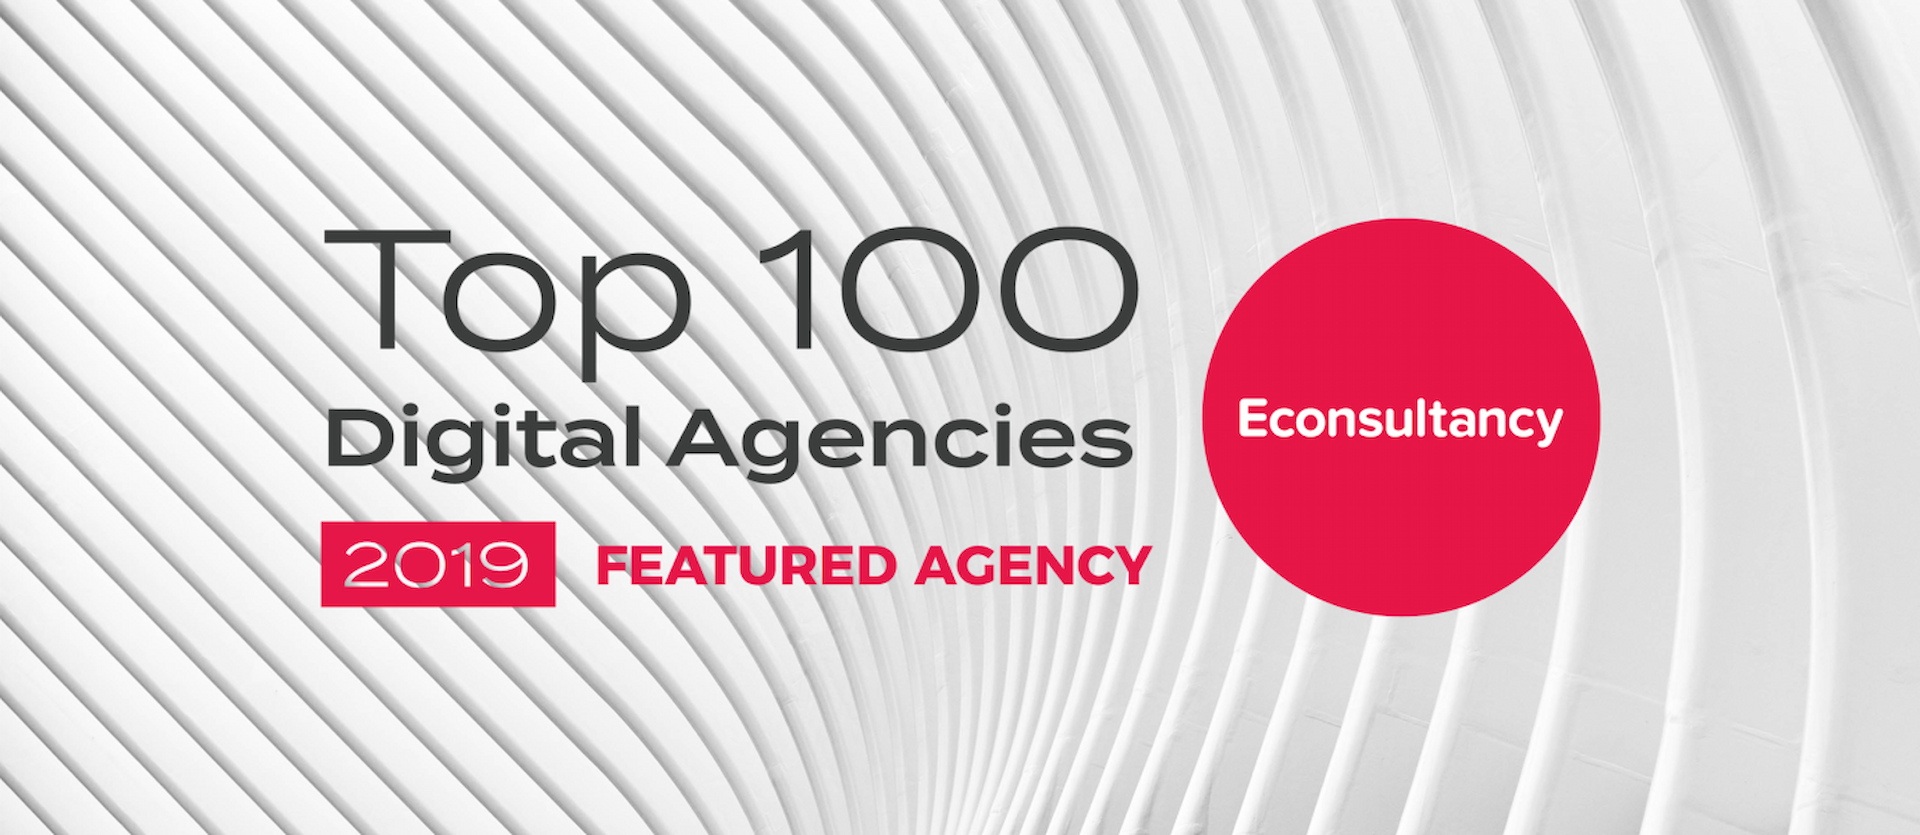 AND Digital Places 23rd In Econsultancy’s Top 100 Digital Agencies Report (1)